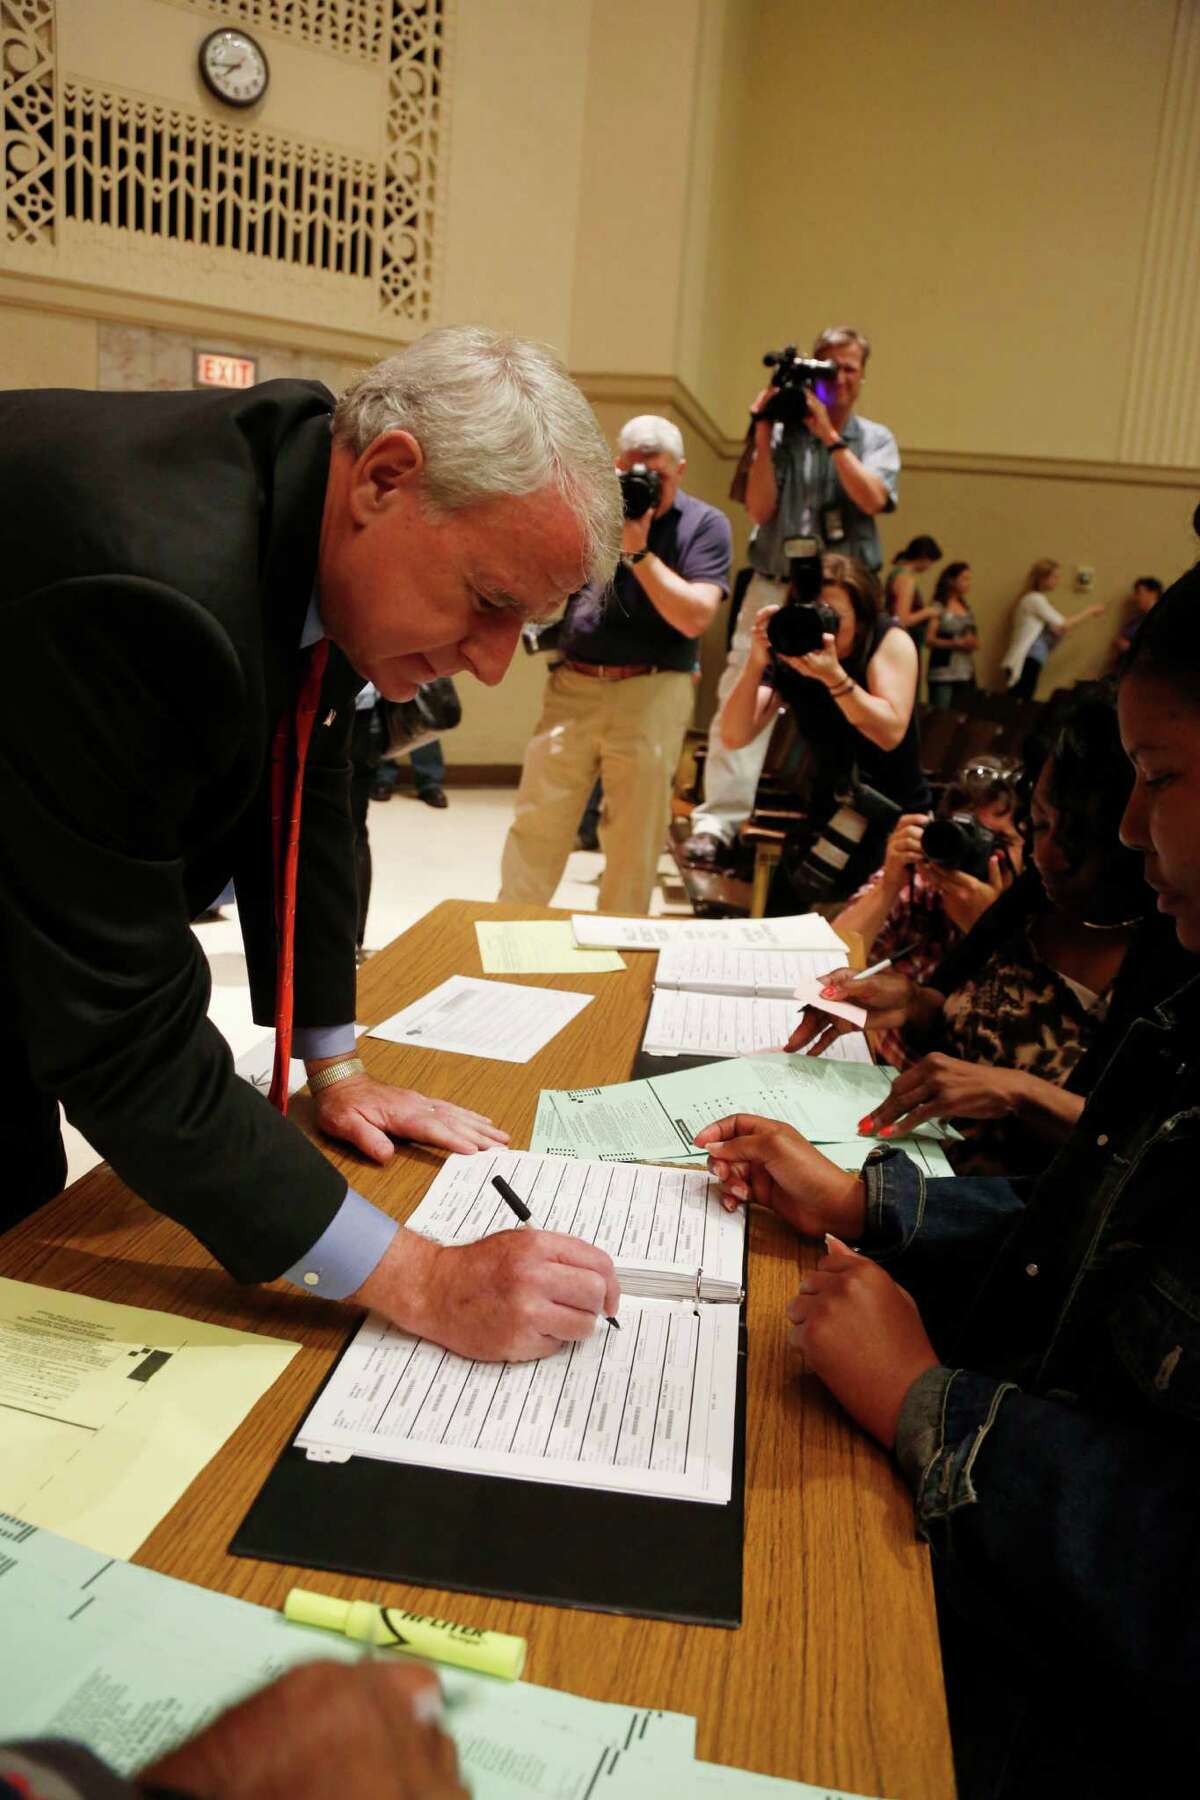 Wisconsin Democratic gubernatorial candidate Tom Barrett signs his name to get his ballot Tuesday, June 5, 2012, in Milwaukee. Barrett is facing Republican Wisconsin Gov. Scott Walker in a recall election. (AP Photo/Jeffrey Phelps)